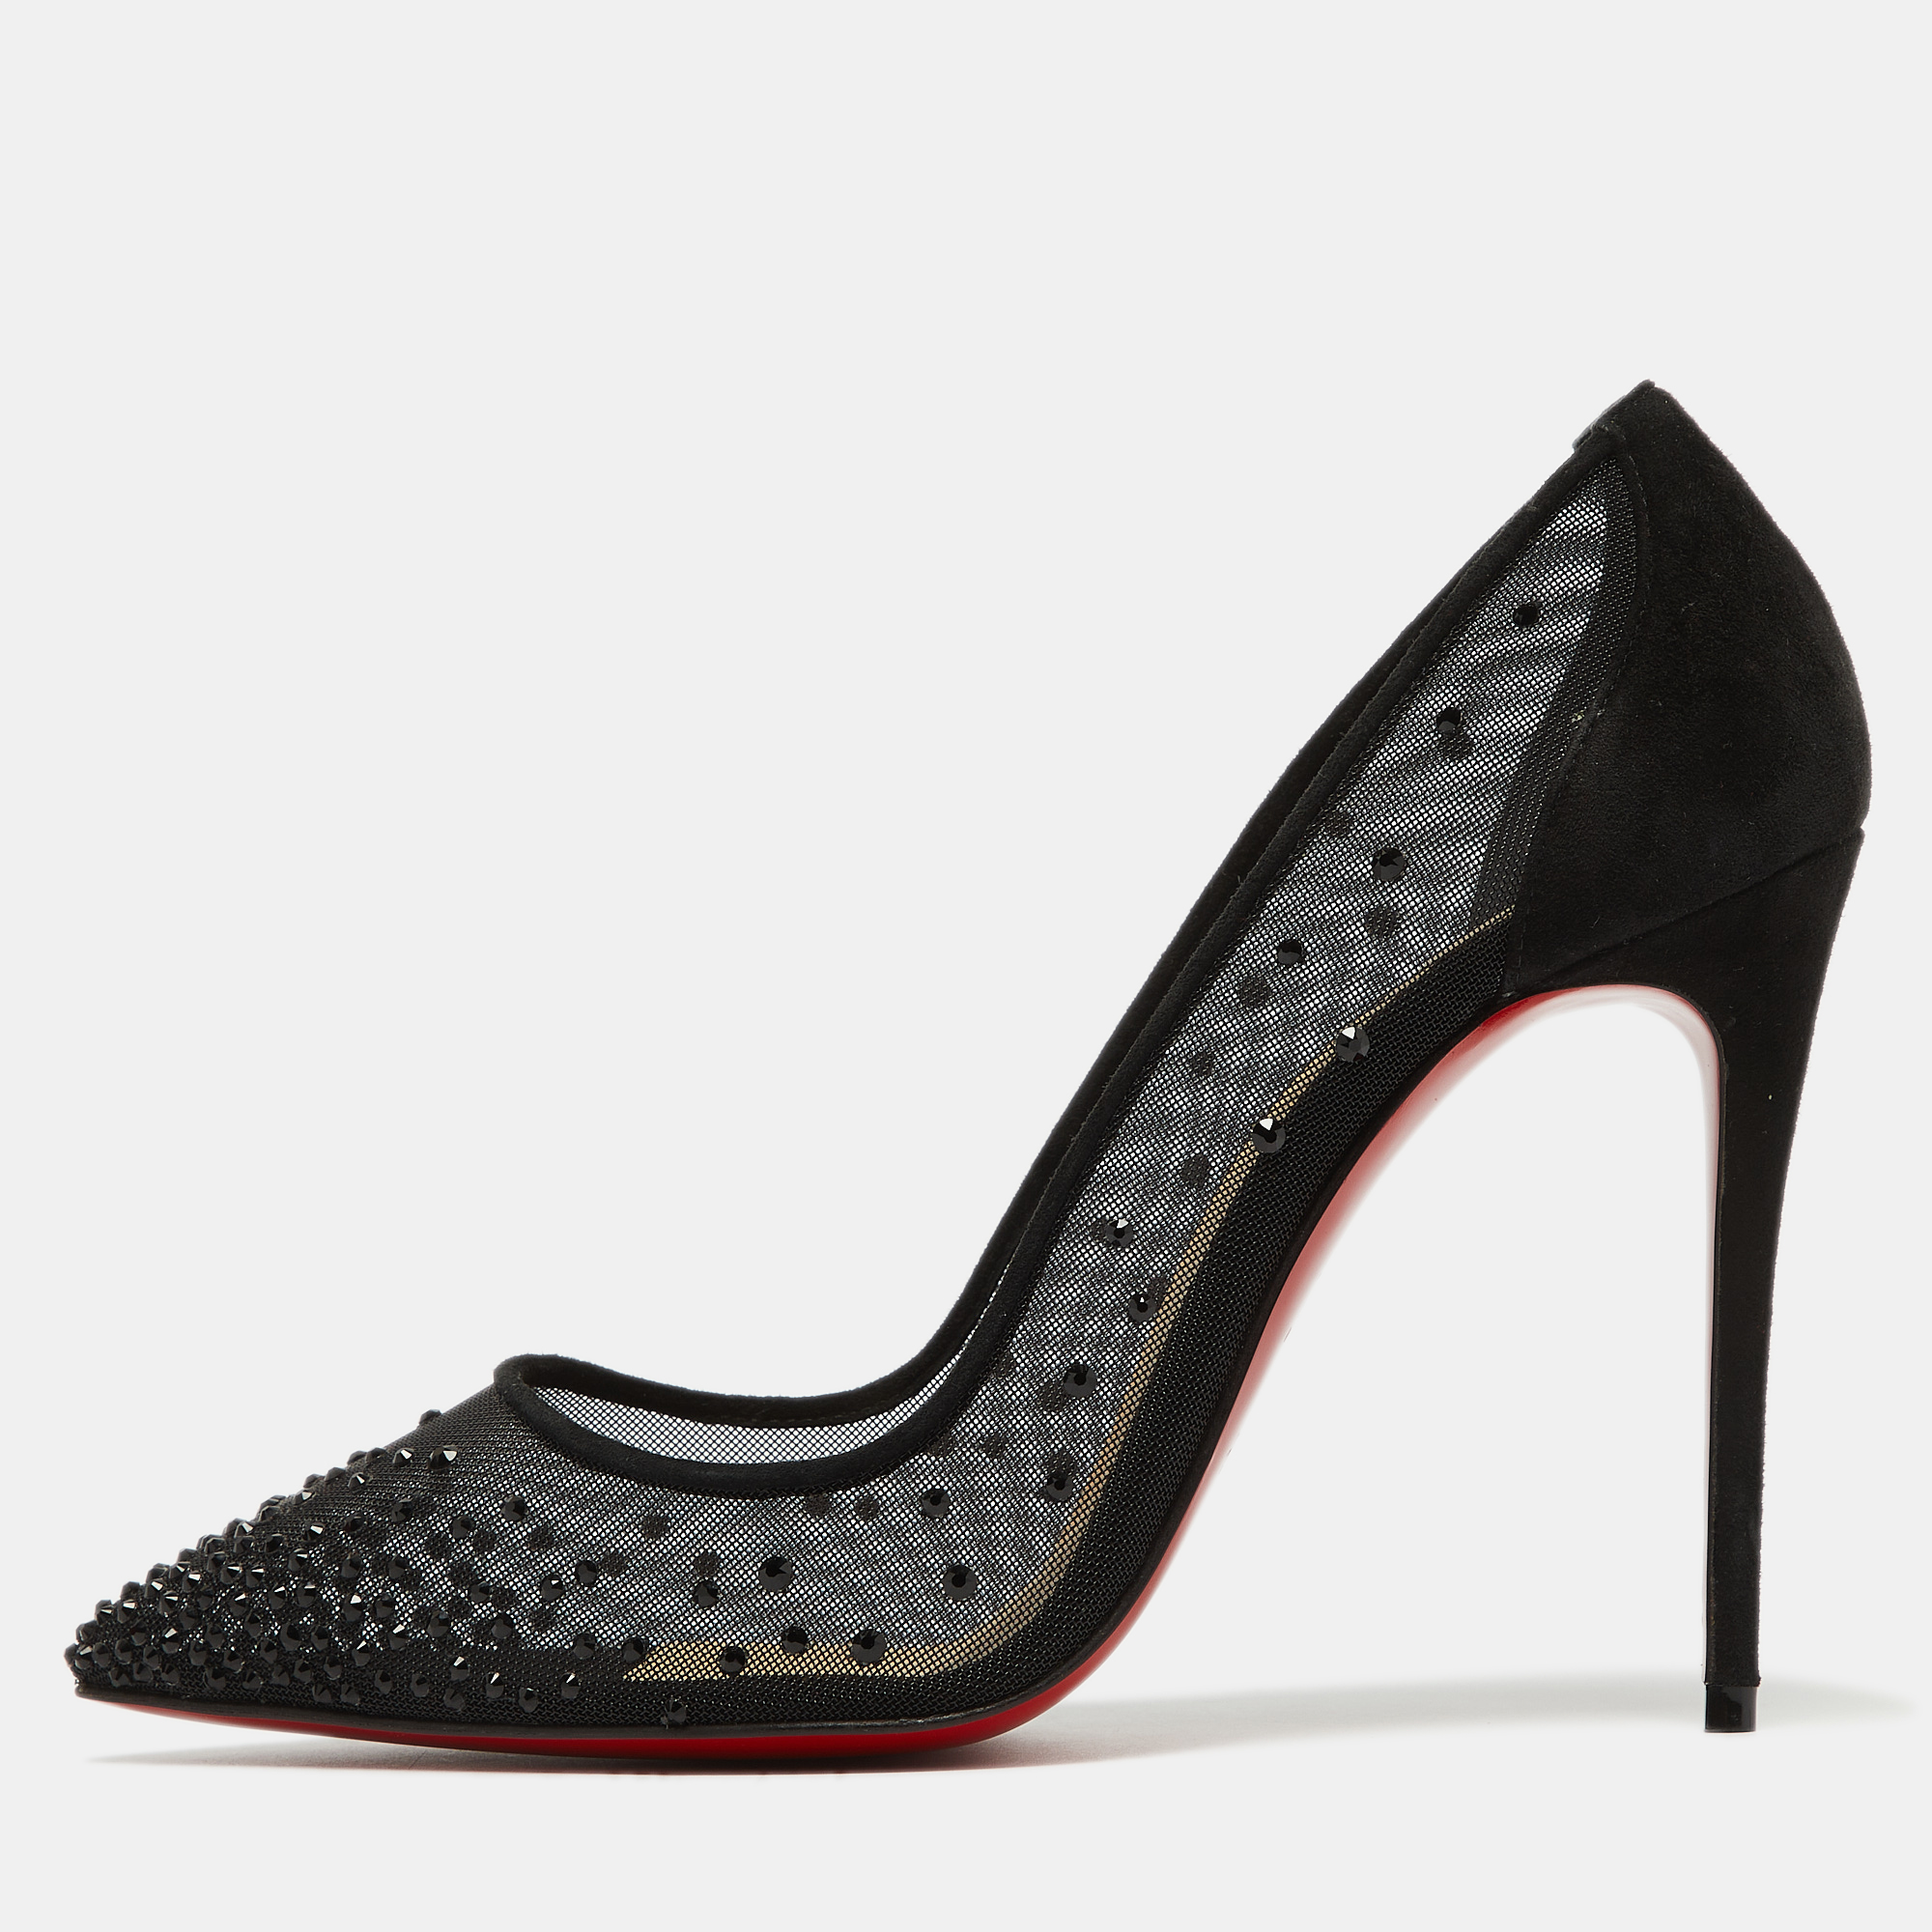 Christian louboutin black suede and mesh follies strass pumps size 37.5